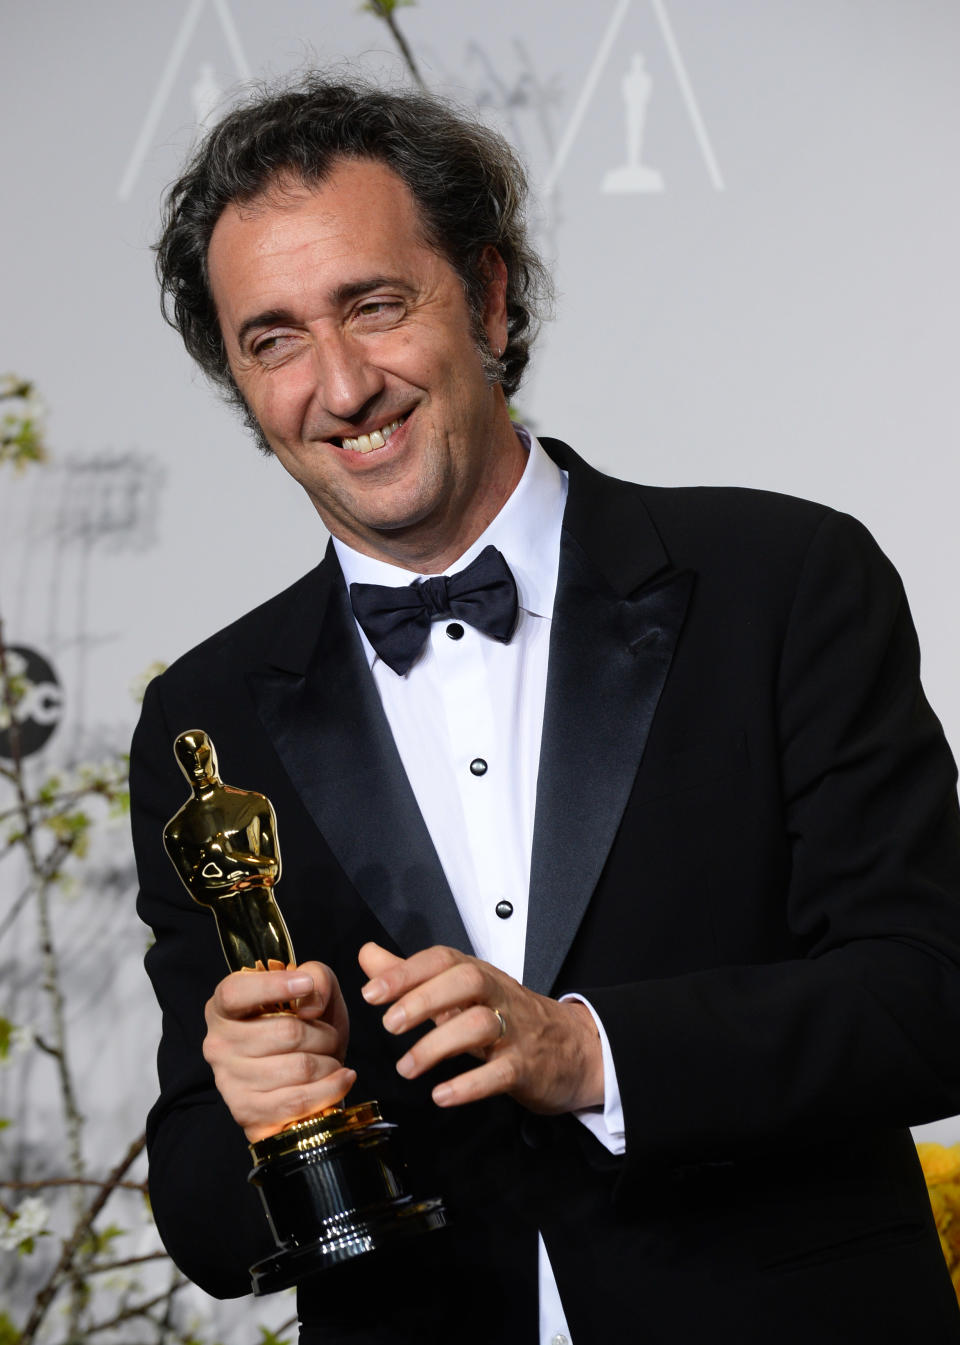 Paolo Sorrentino poses in the press room with the award for best foreign language film of the year for "The Great Beauty" during the Oscars at the Dolby Theatre on Sunday, March 2, 2014, in Los Angeles. (Photo by Jordan Strauss/Invision/AP)